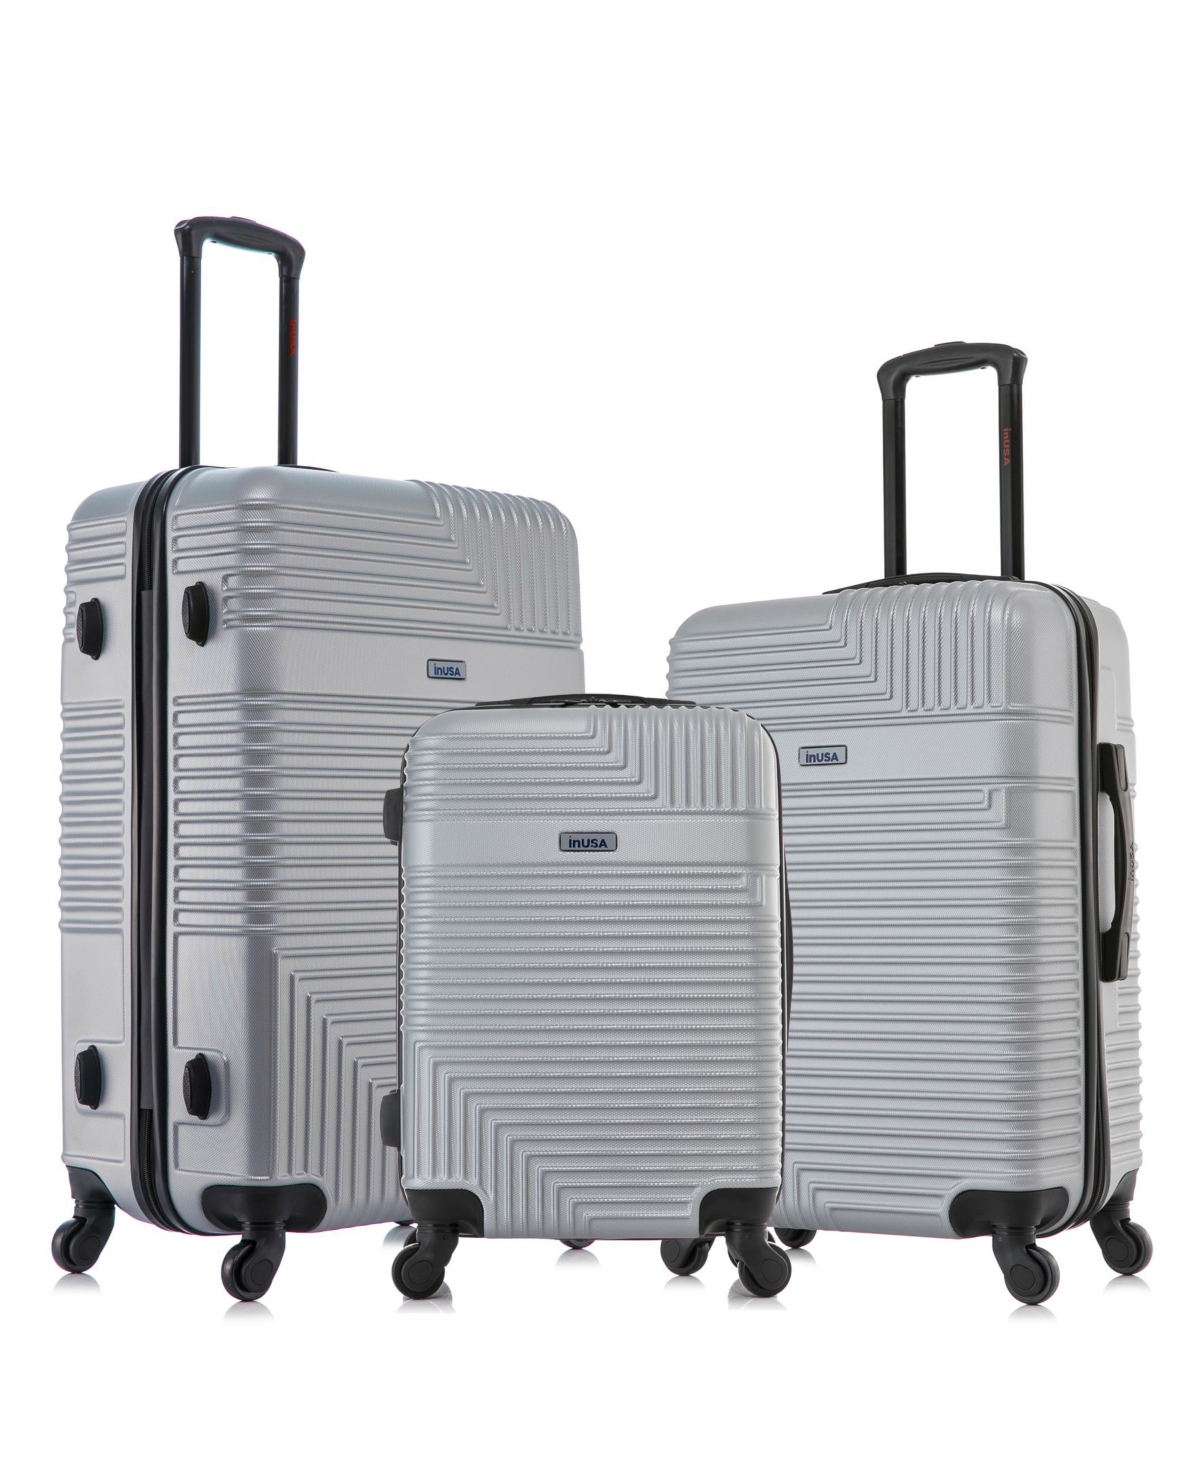 Resilience Lightweight Hardside Spinner Luggage Set, 3 piece - Silver